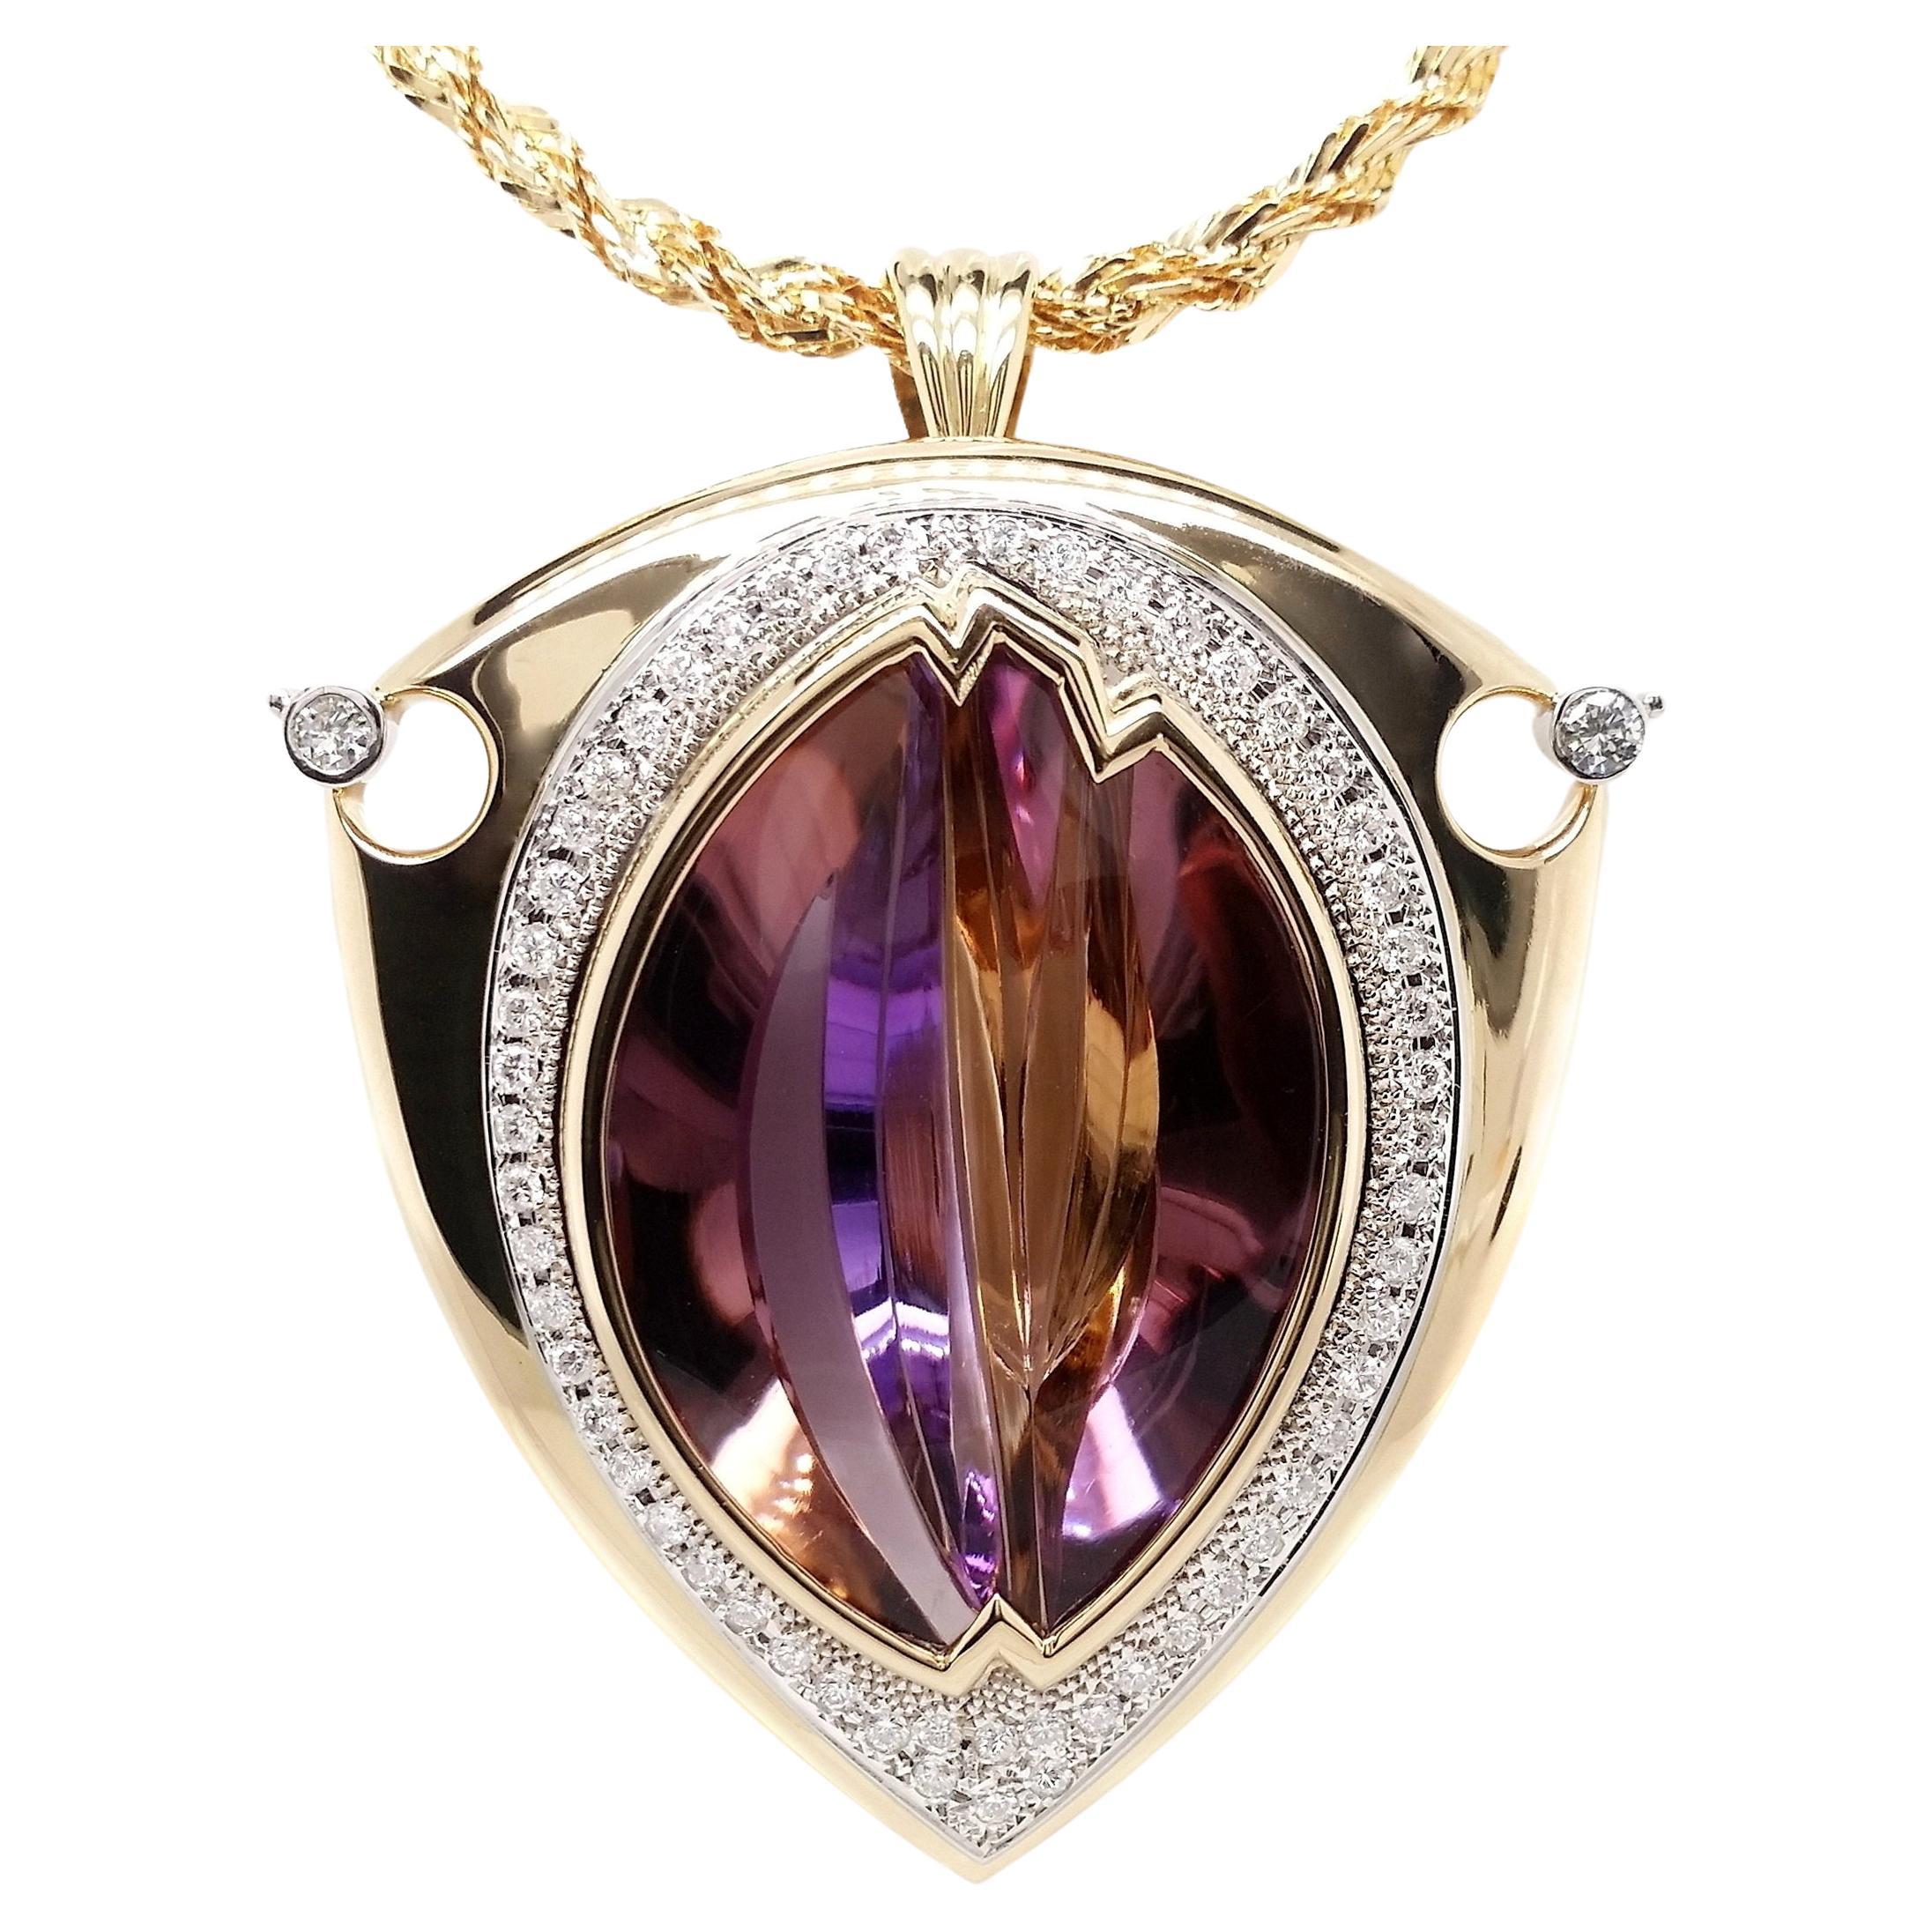 IGI Certified 57.07ct Natural Purple Amethyst 1.23ct Diamonds Brooch / Necklace For Sale